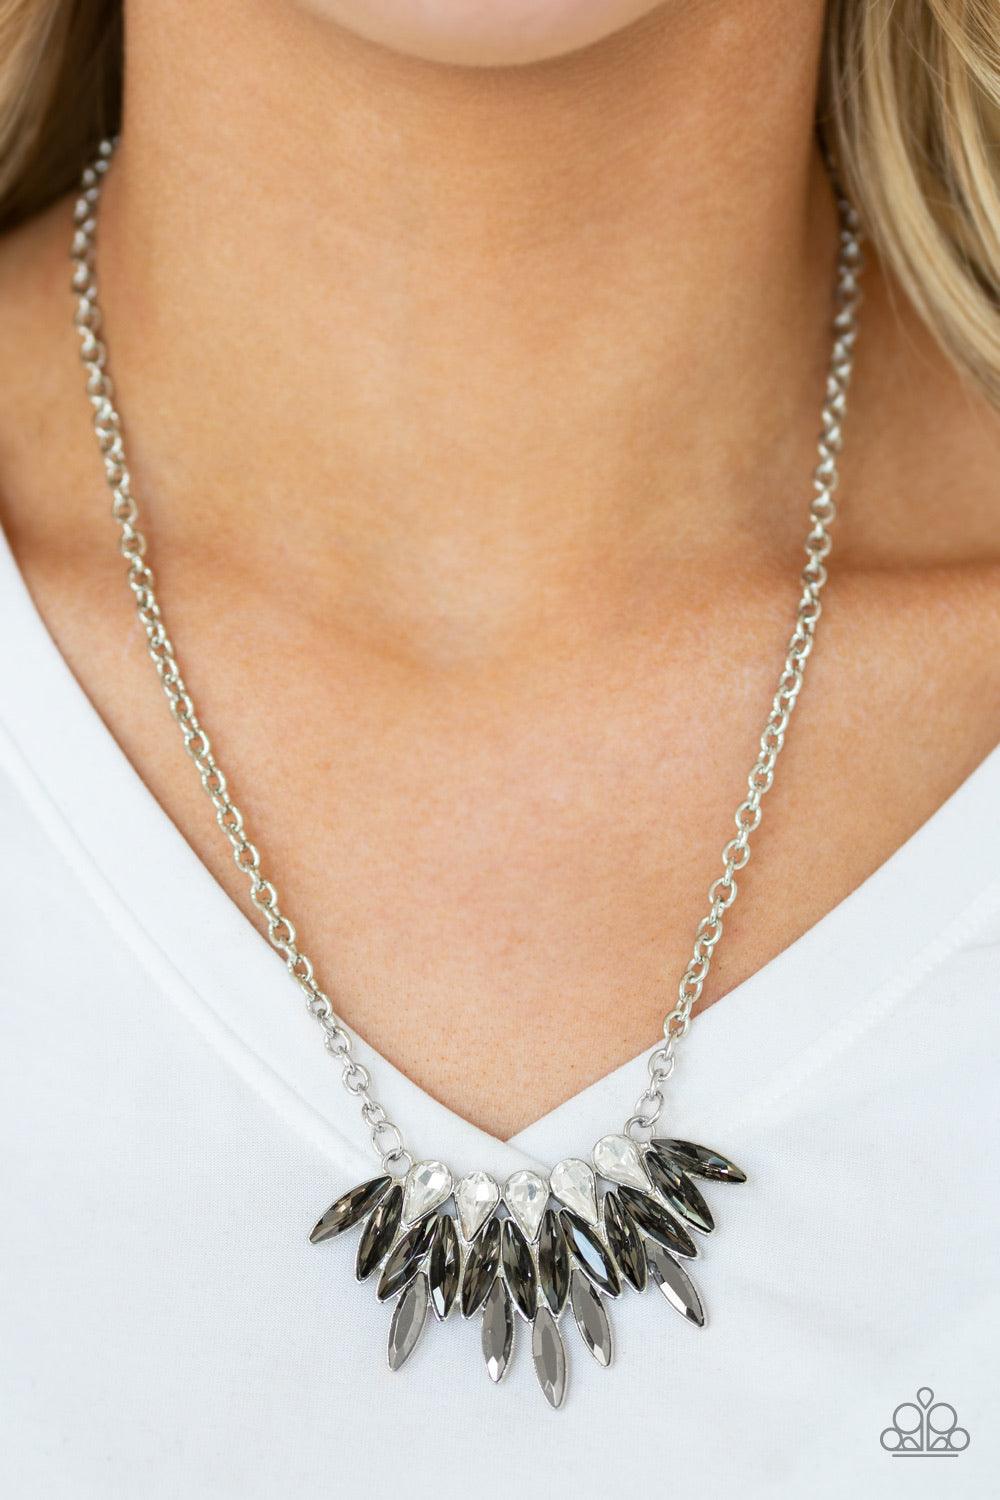 Paparazzi Accessories Crown Couture - Silver Featuring regal teardrop and marquise style cuts, glittery white, smoky gray, and glassy hematite rhinestones fan below the collar for a dramatic look. Features an adjustable clasp closure. Sold as one individu